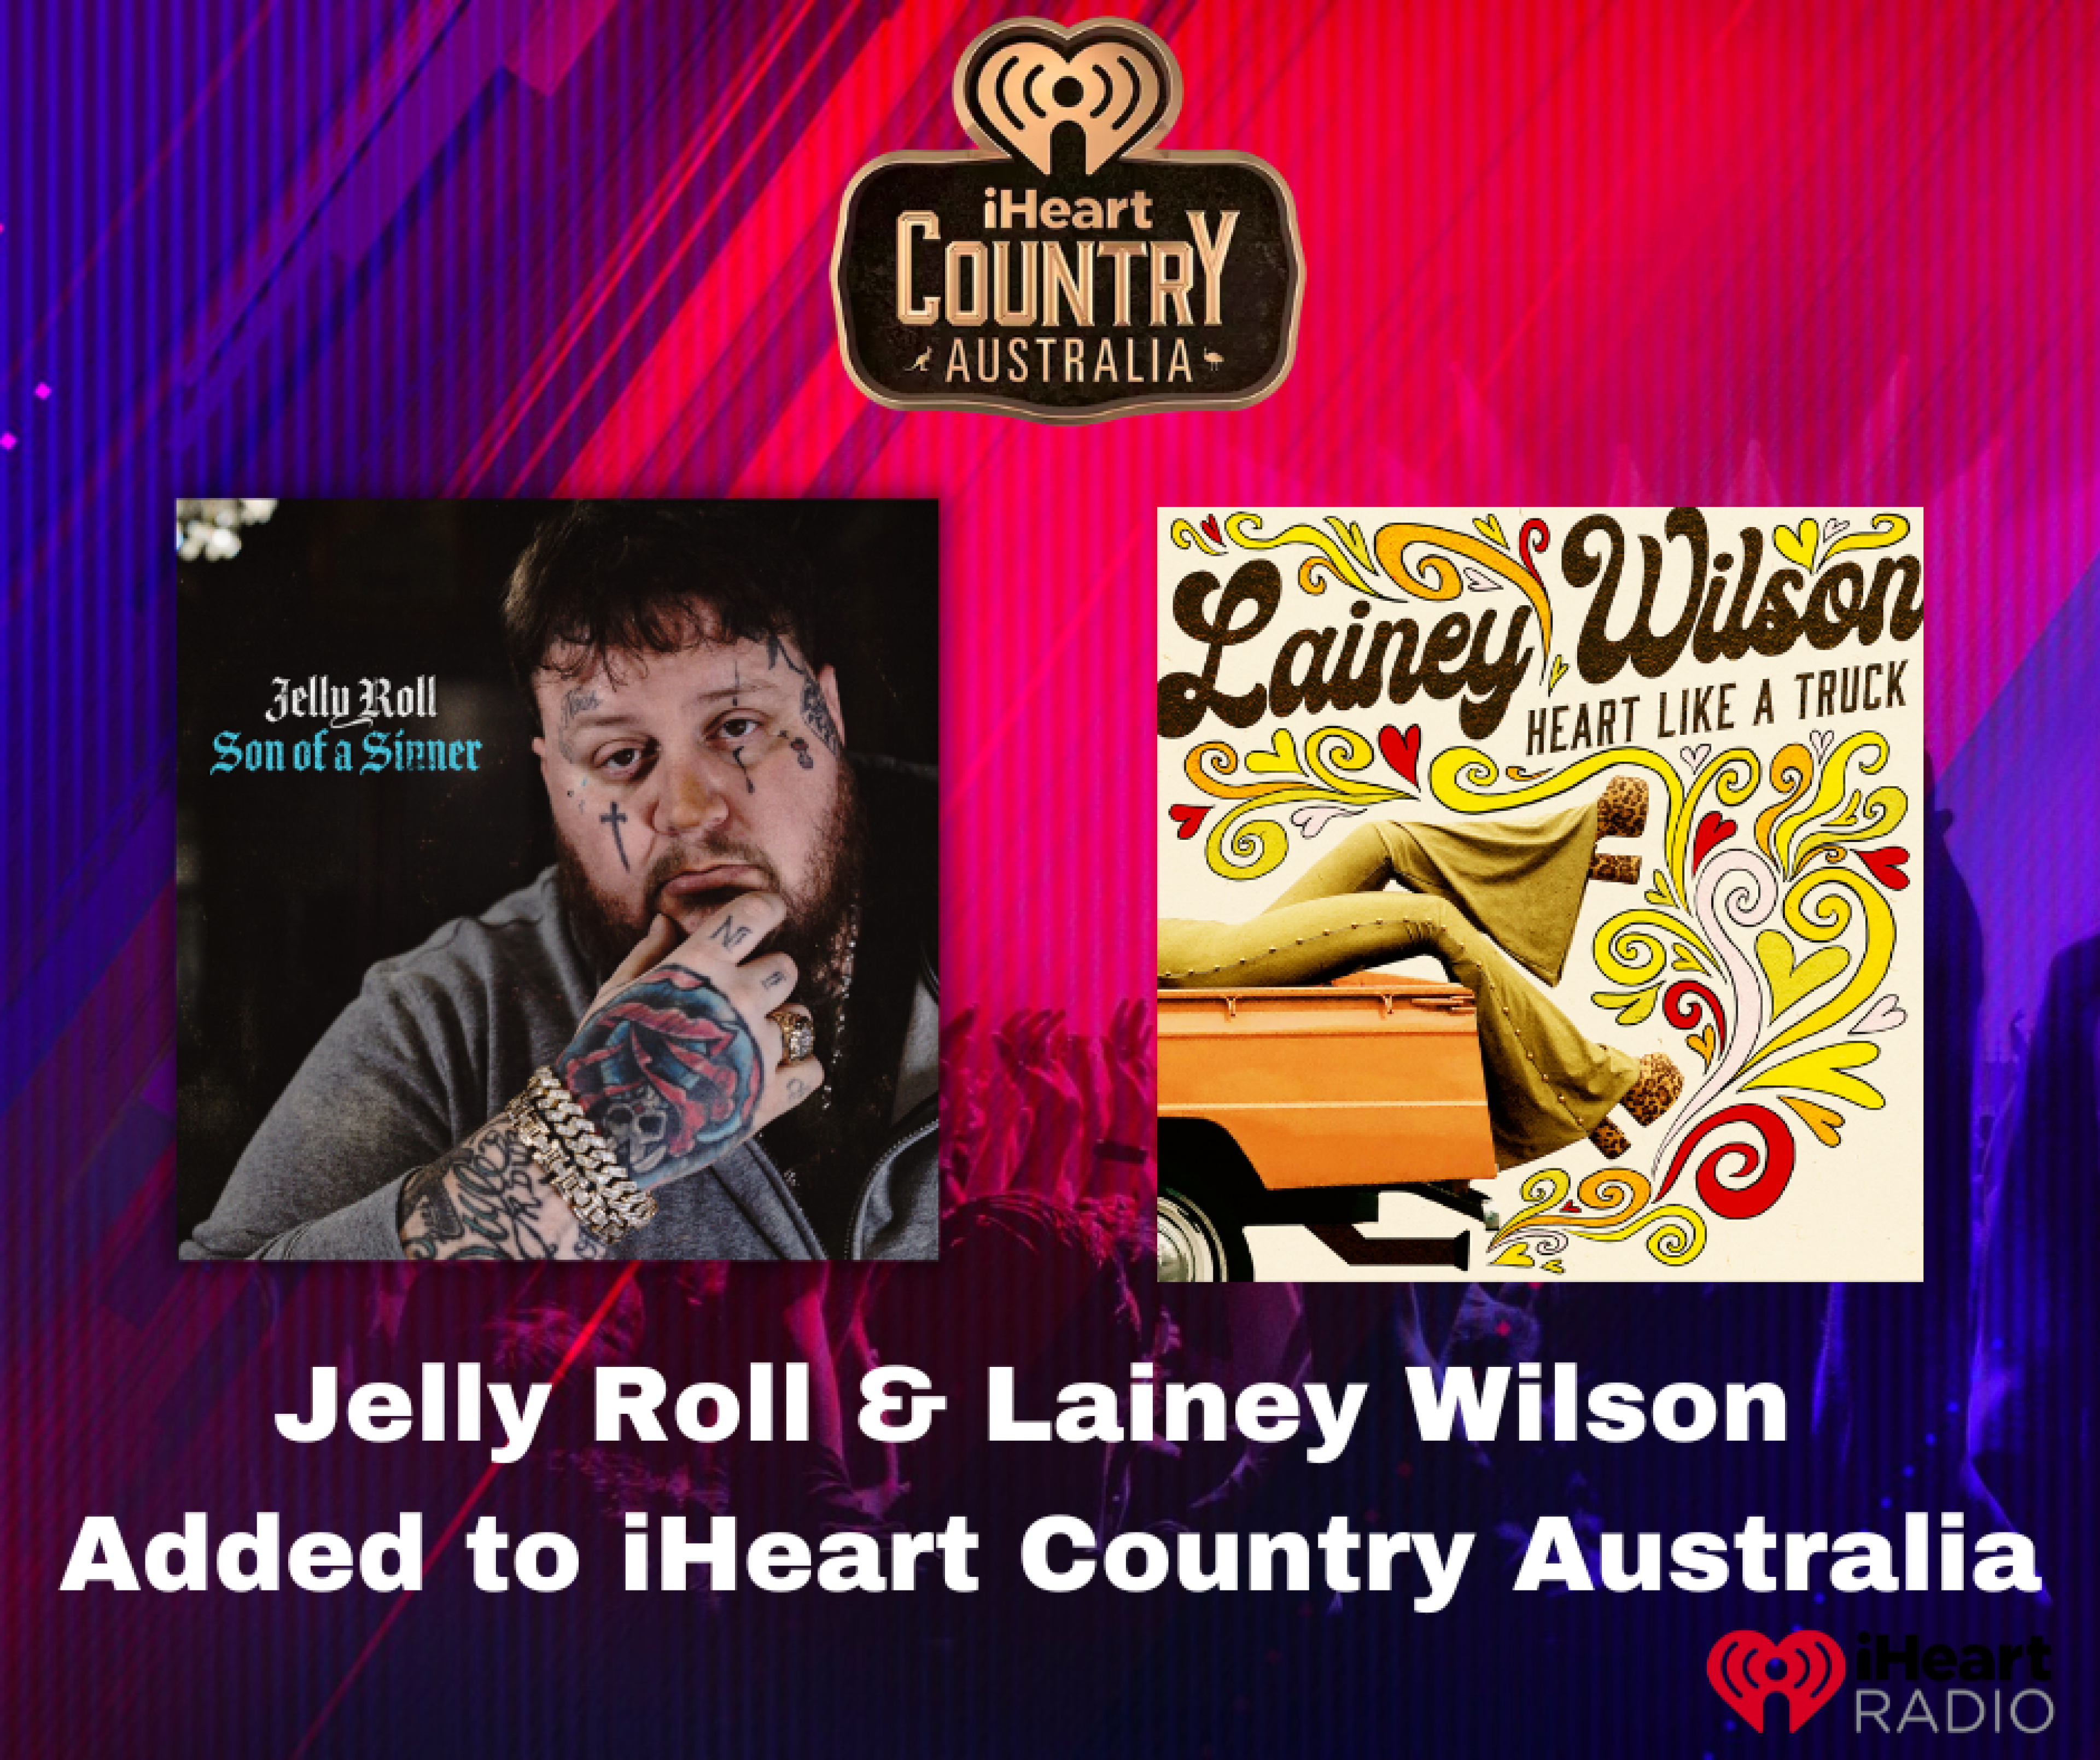 Jelly Roll & Lainey Wilson singles added to iHeart Country Australia